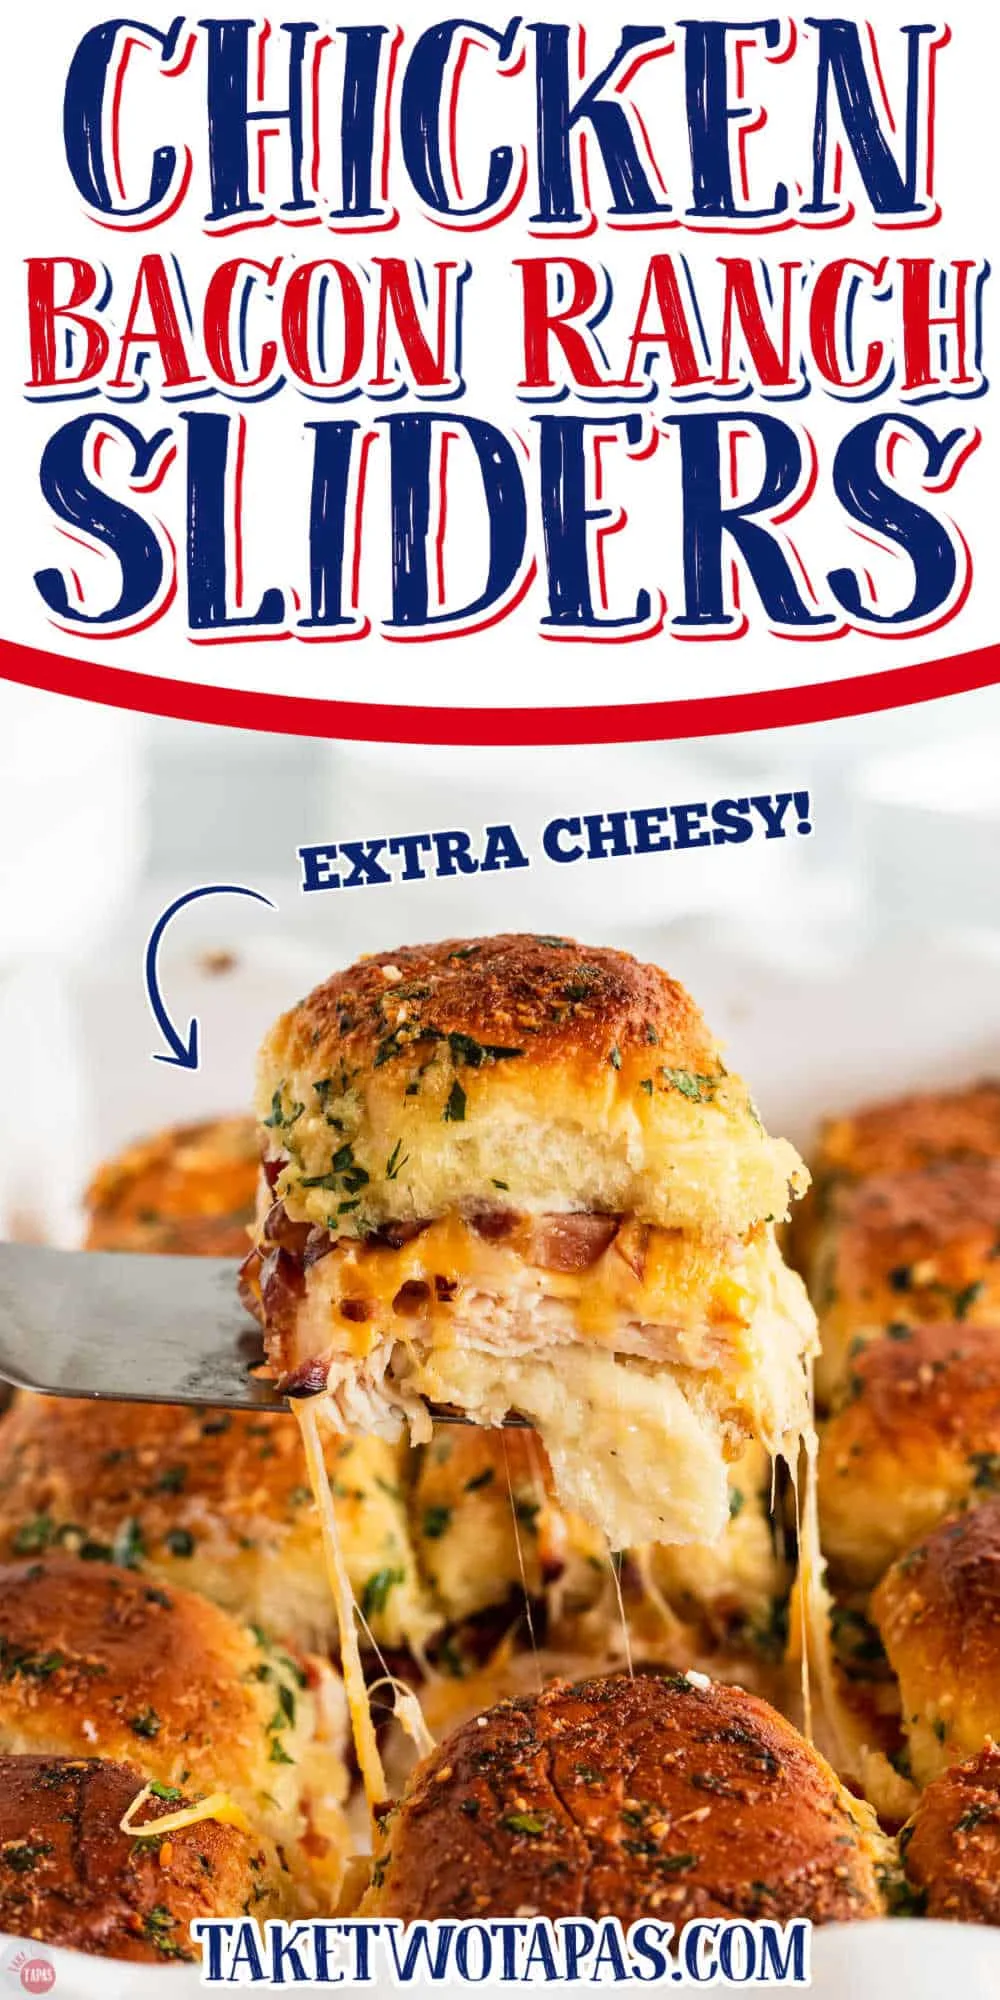 sliders with text "chicken bacon ranch sliders"